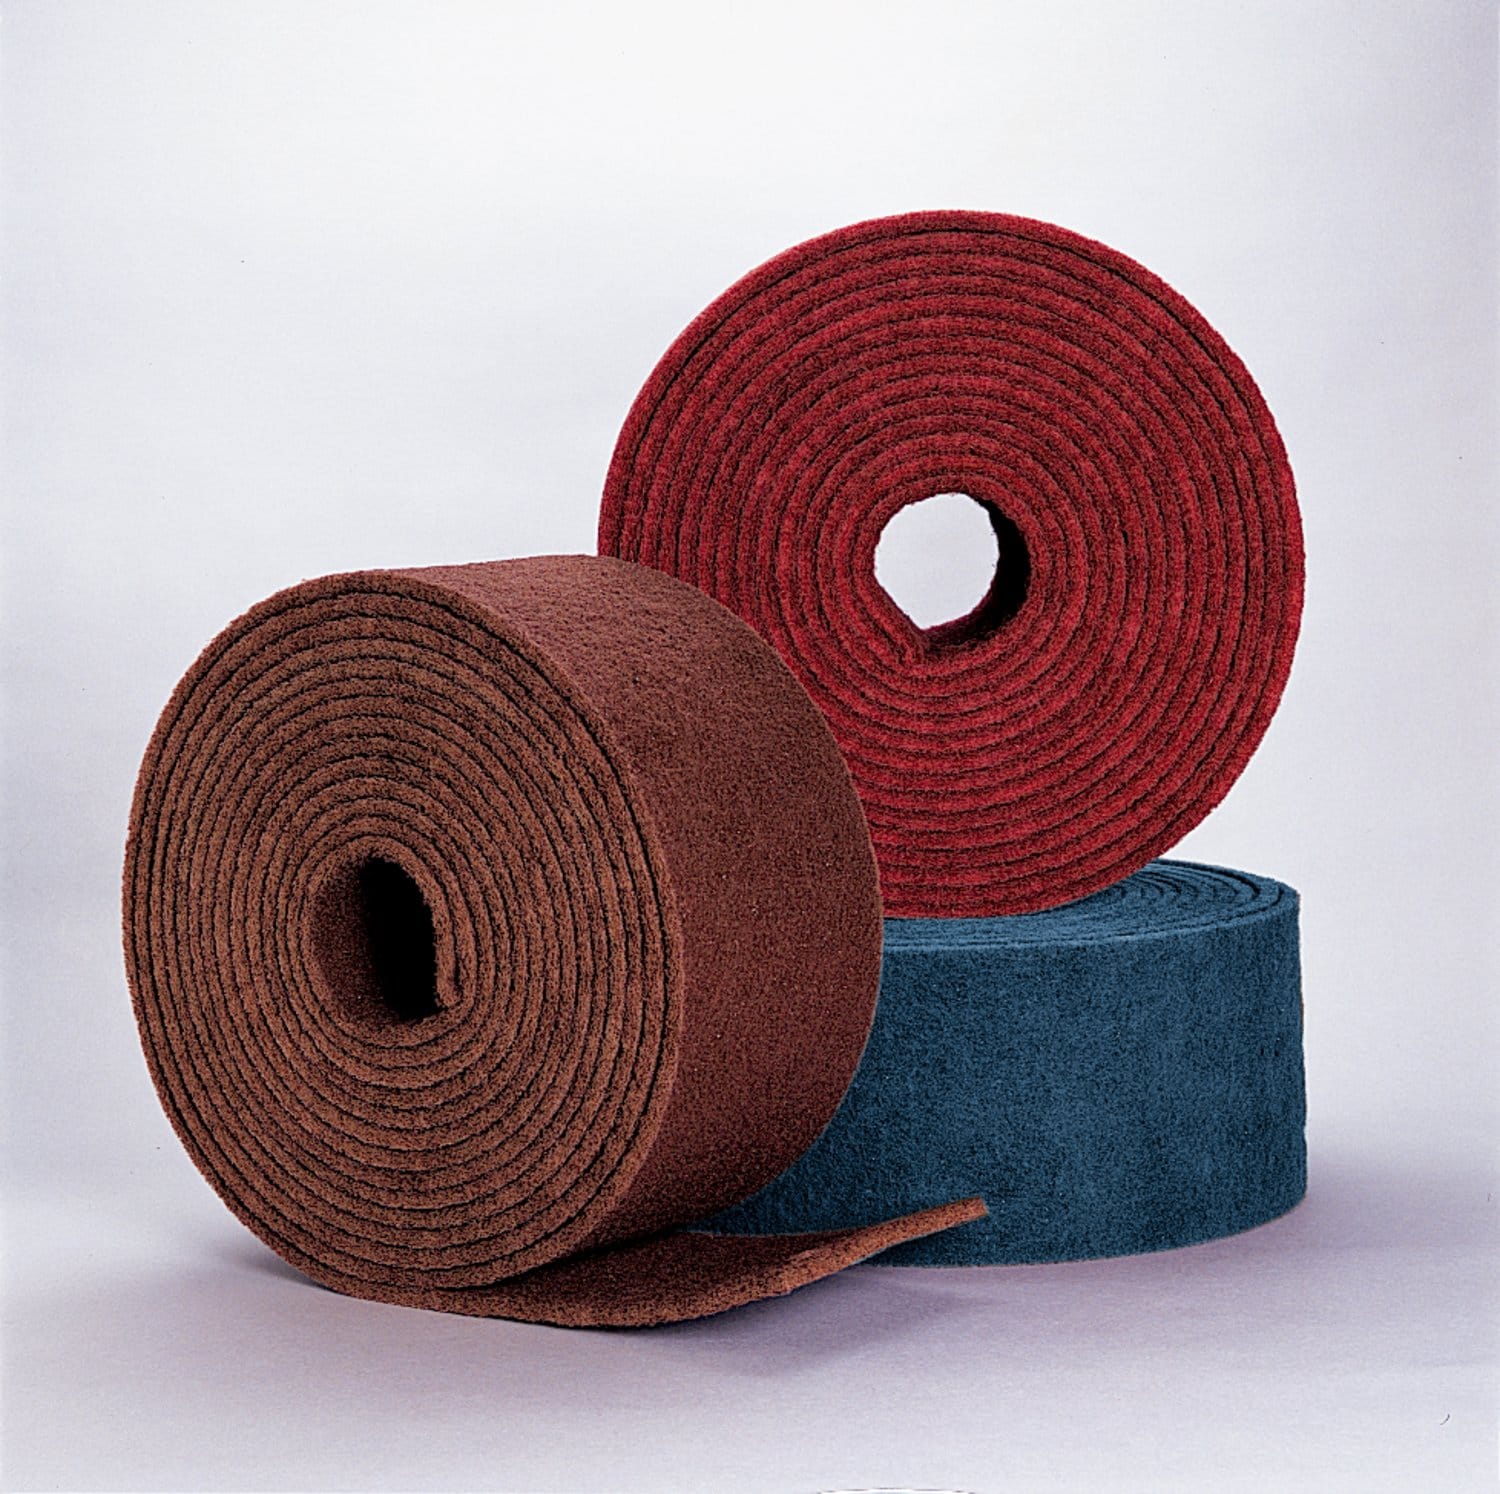 7010368520 - Standard Abrasives A/O Buff and Blend GP Roll 830016, 6 in x 30 ft A
FIN, 2 ea/Case